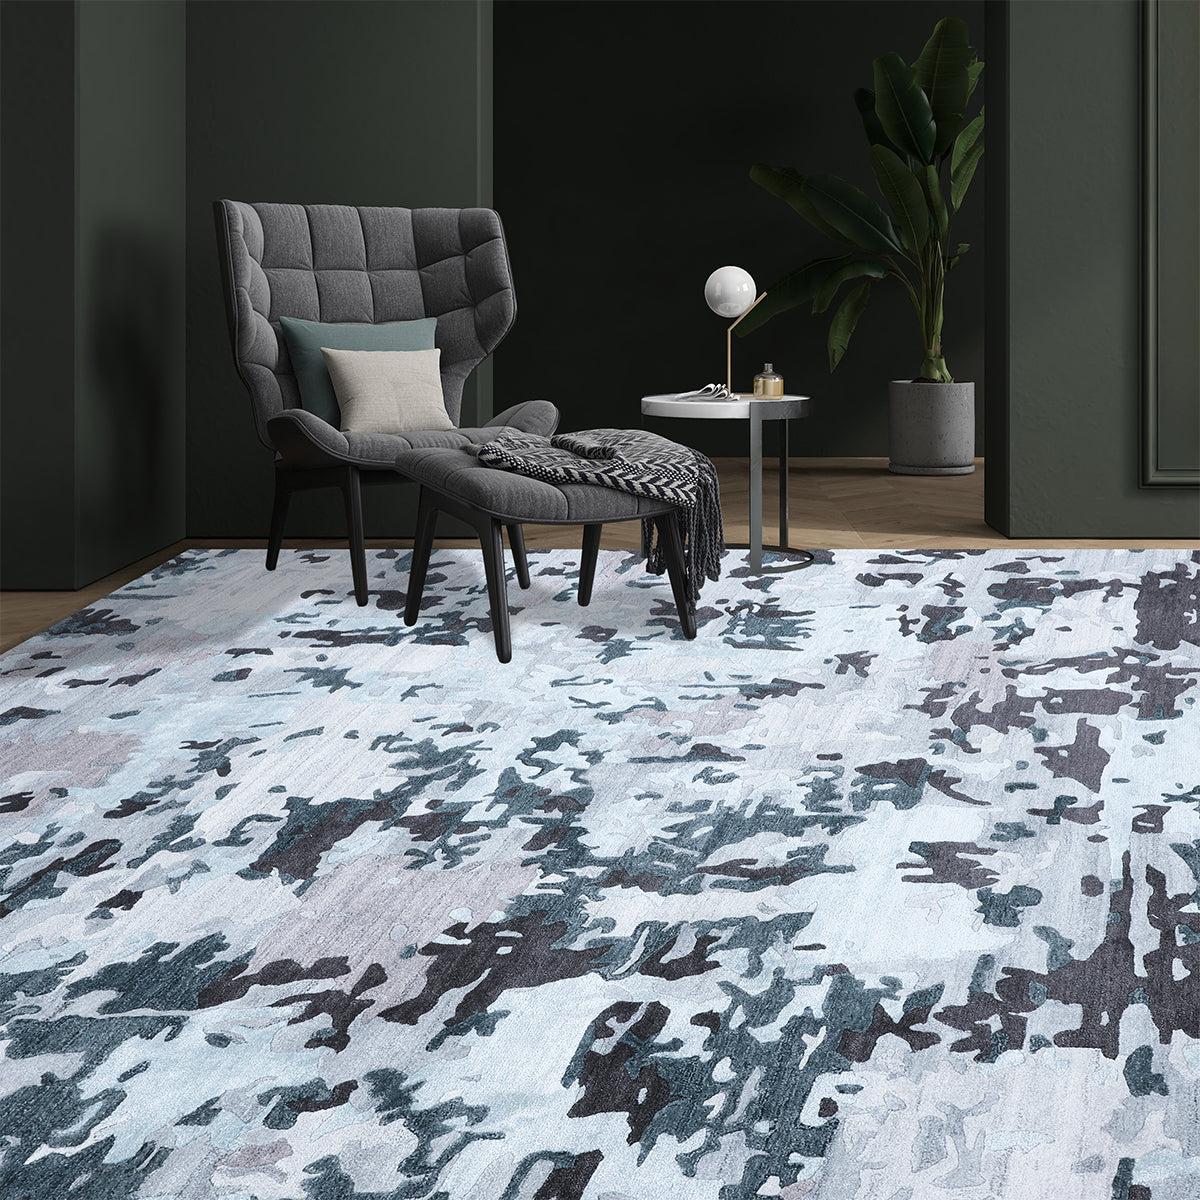 Make a room sit up with these contemporary style rugs. This modern Dark Gray and Light Blue, along with the use of wool and viscose, creates a soft and subtle effect with a pattern that shimmers in the light. Measures: 6'x9'.